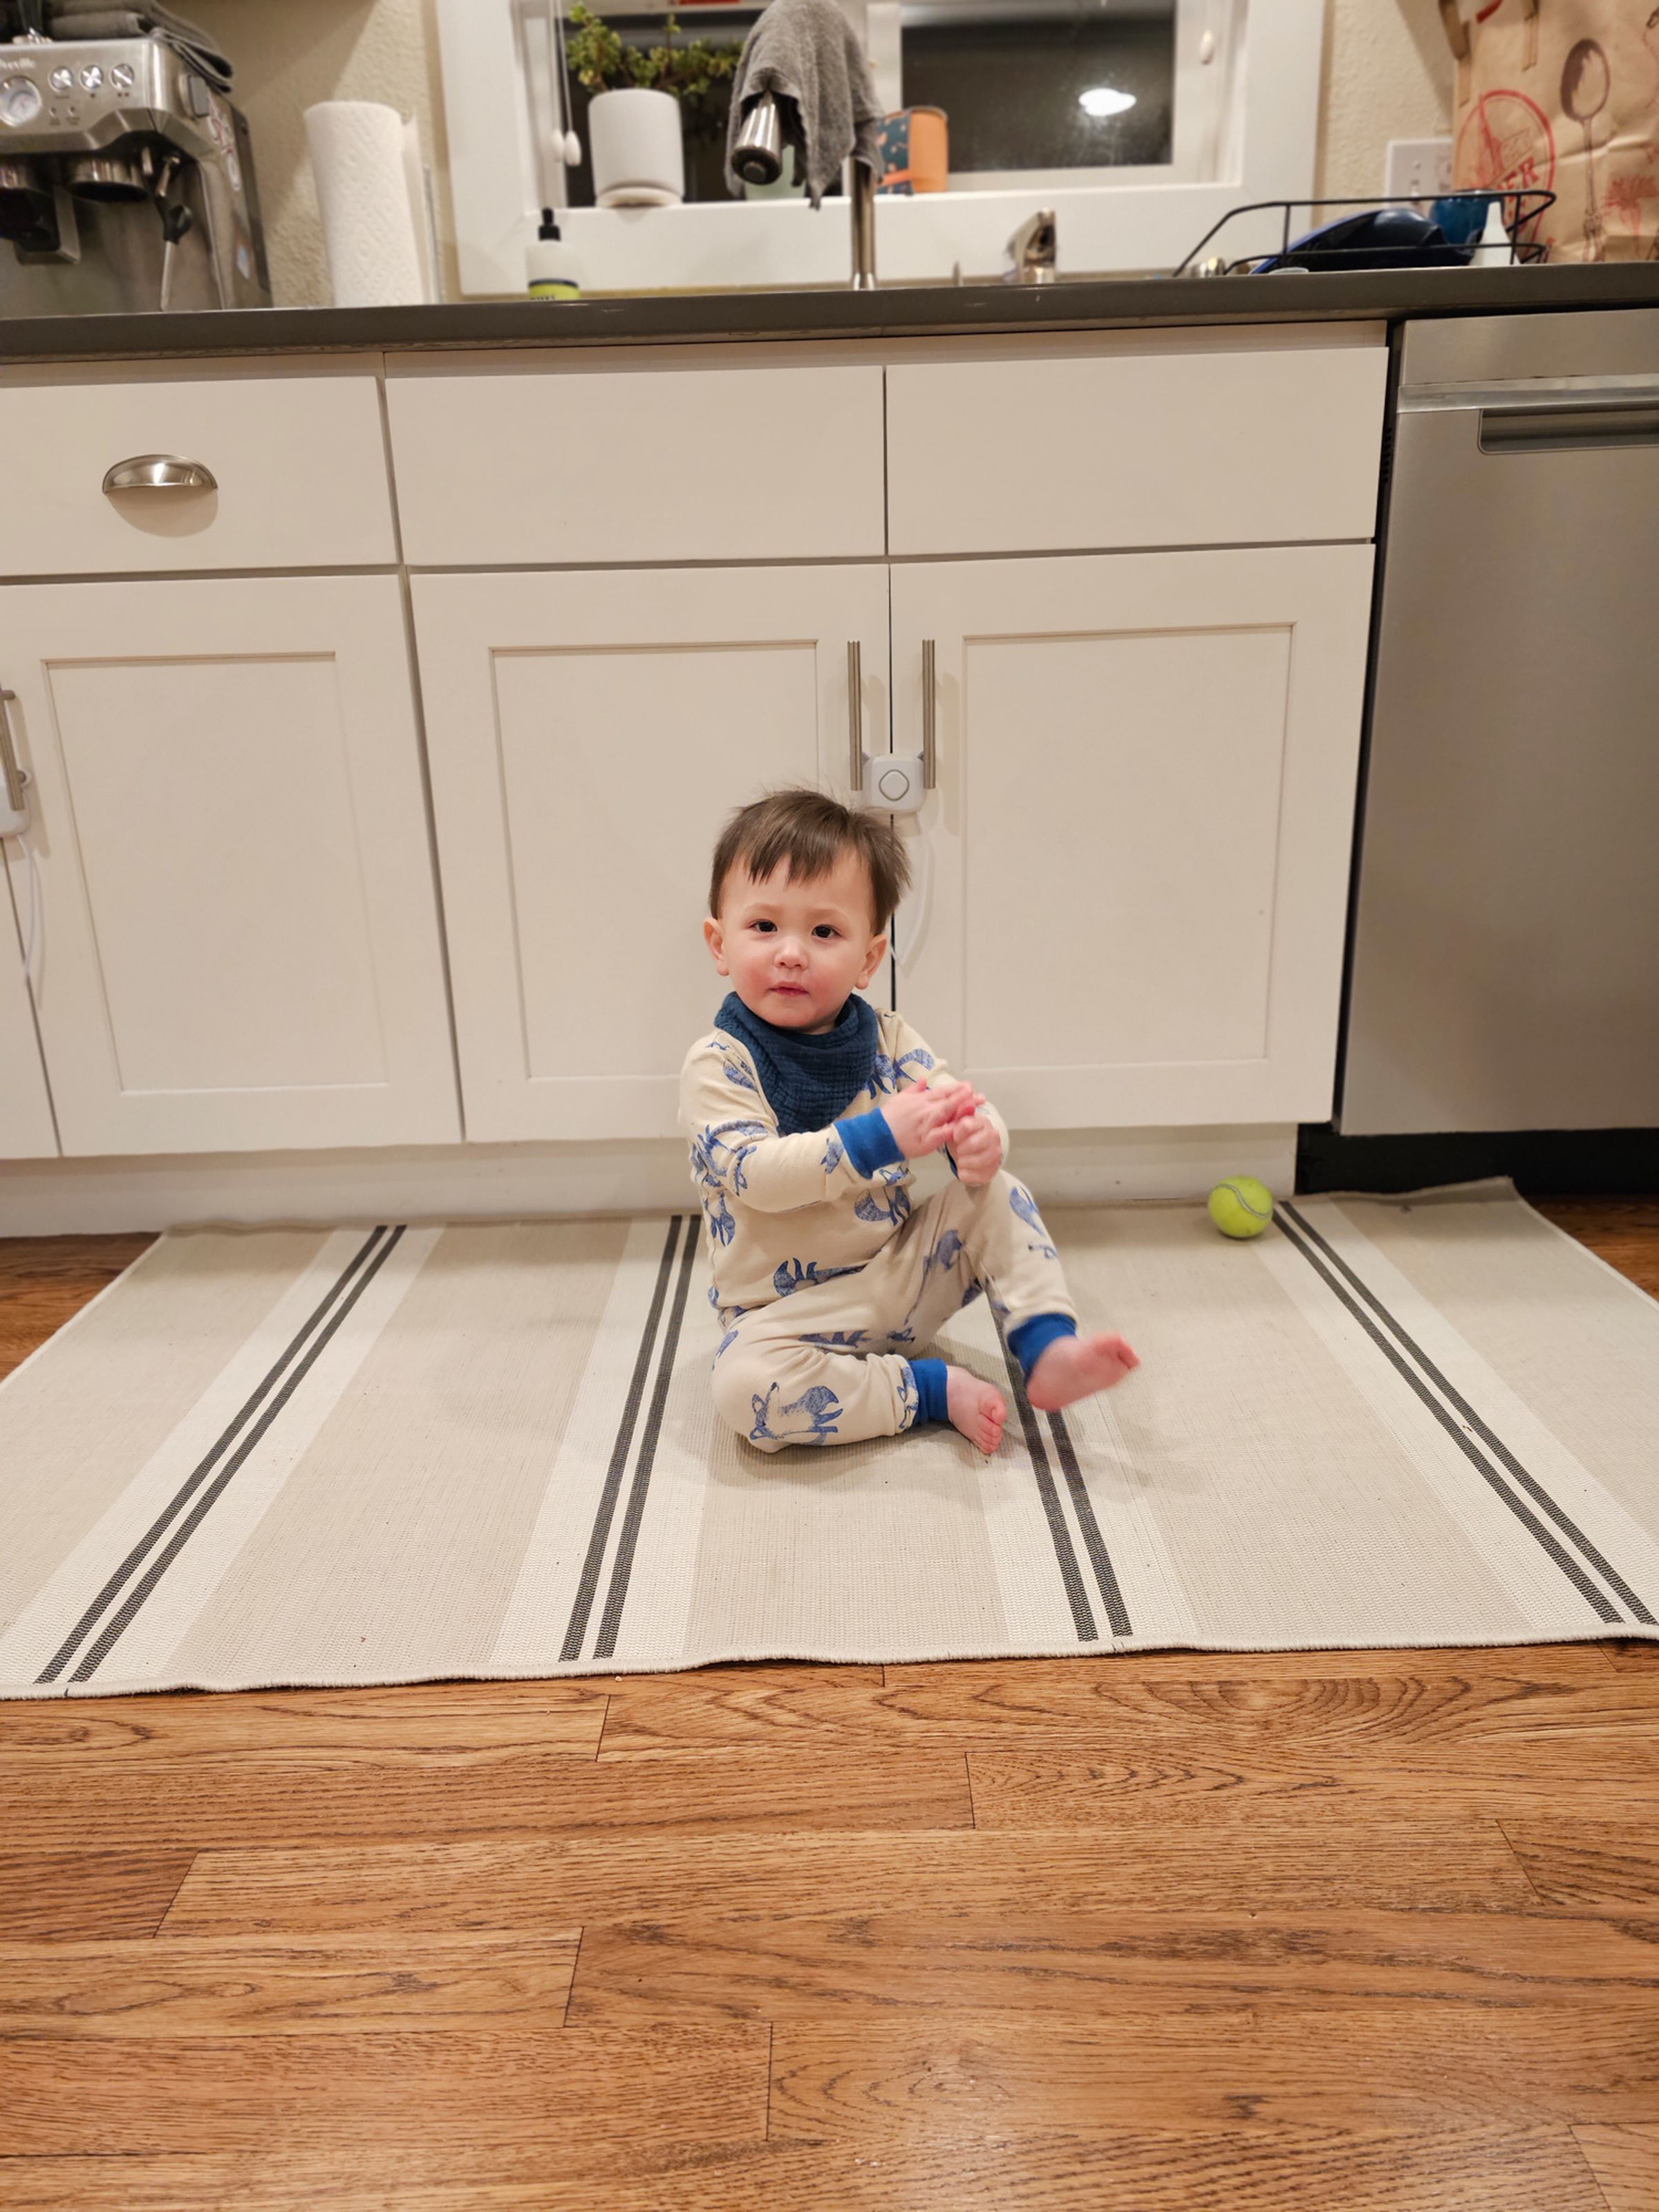 Picture of a toddler sitting on a kitchen rug looking at the camera.